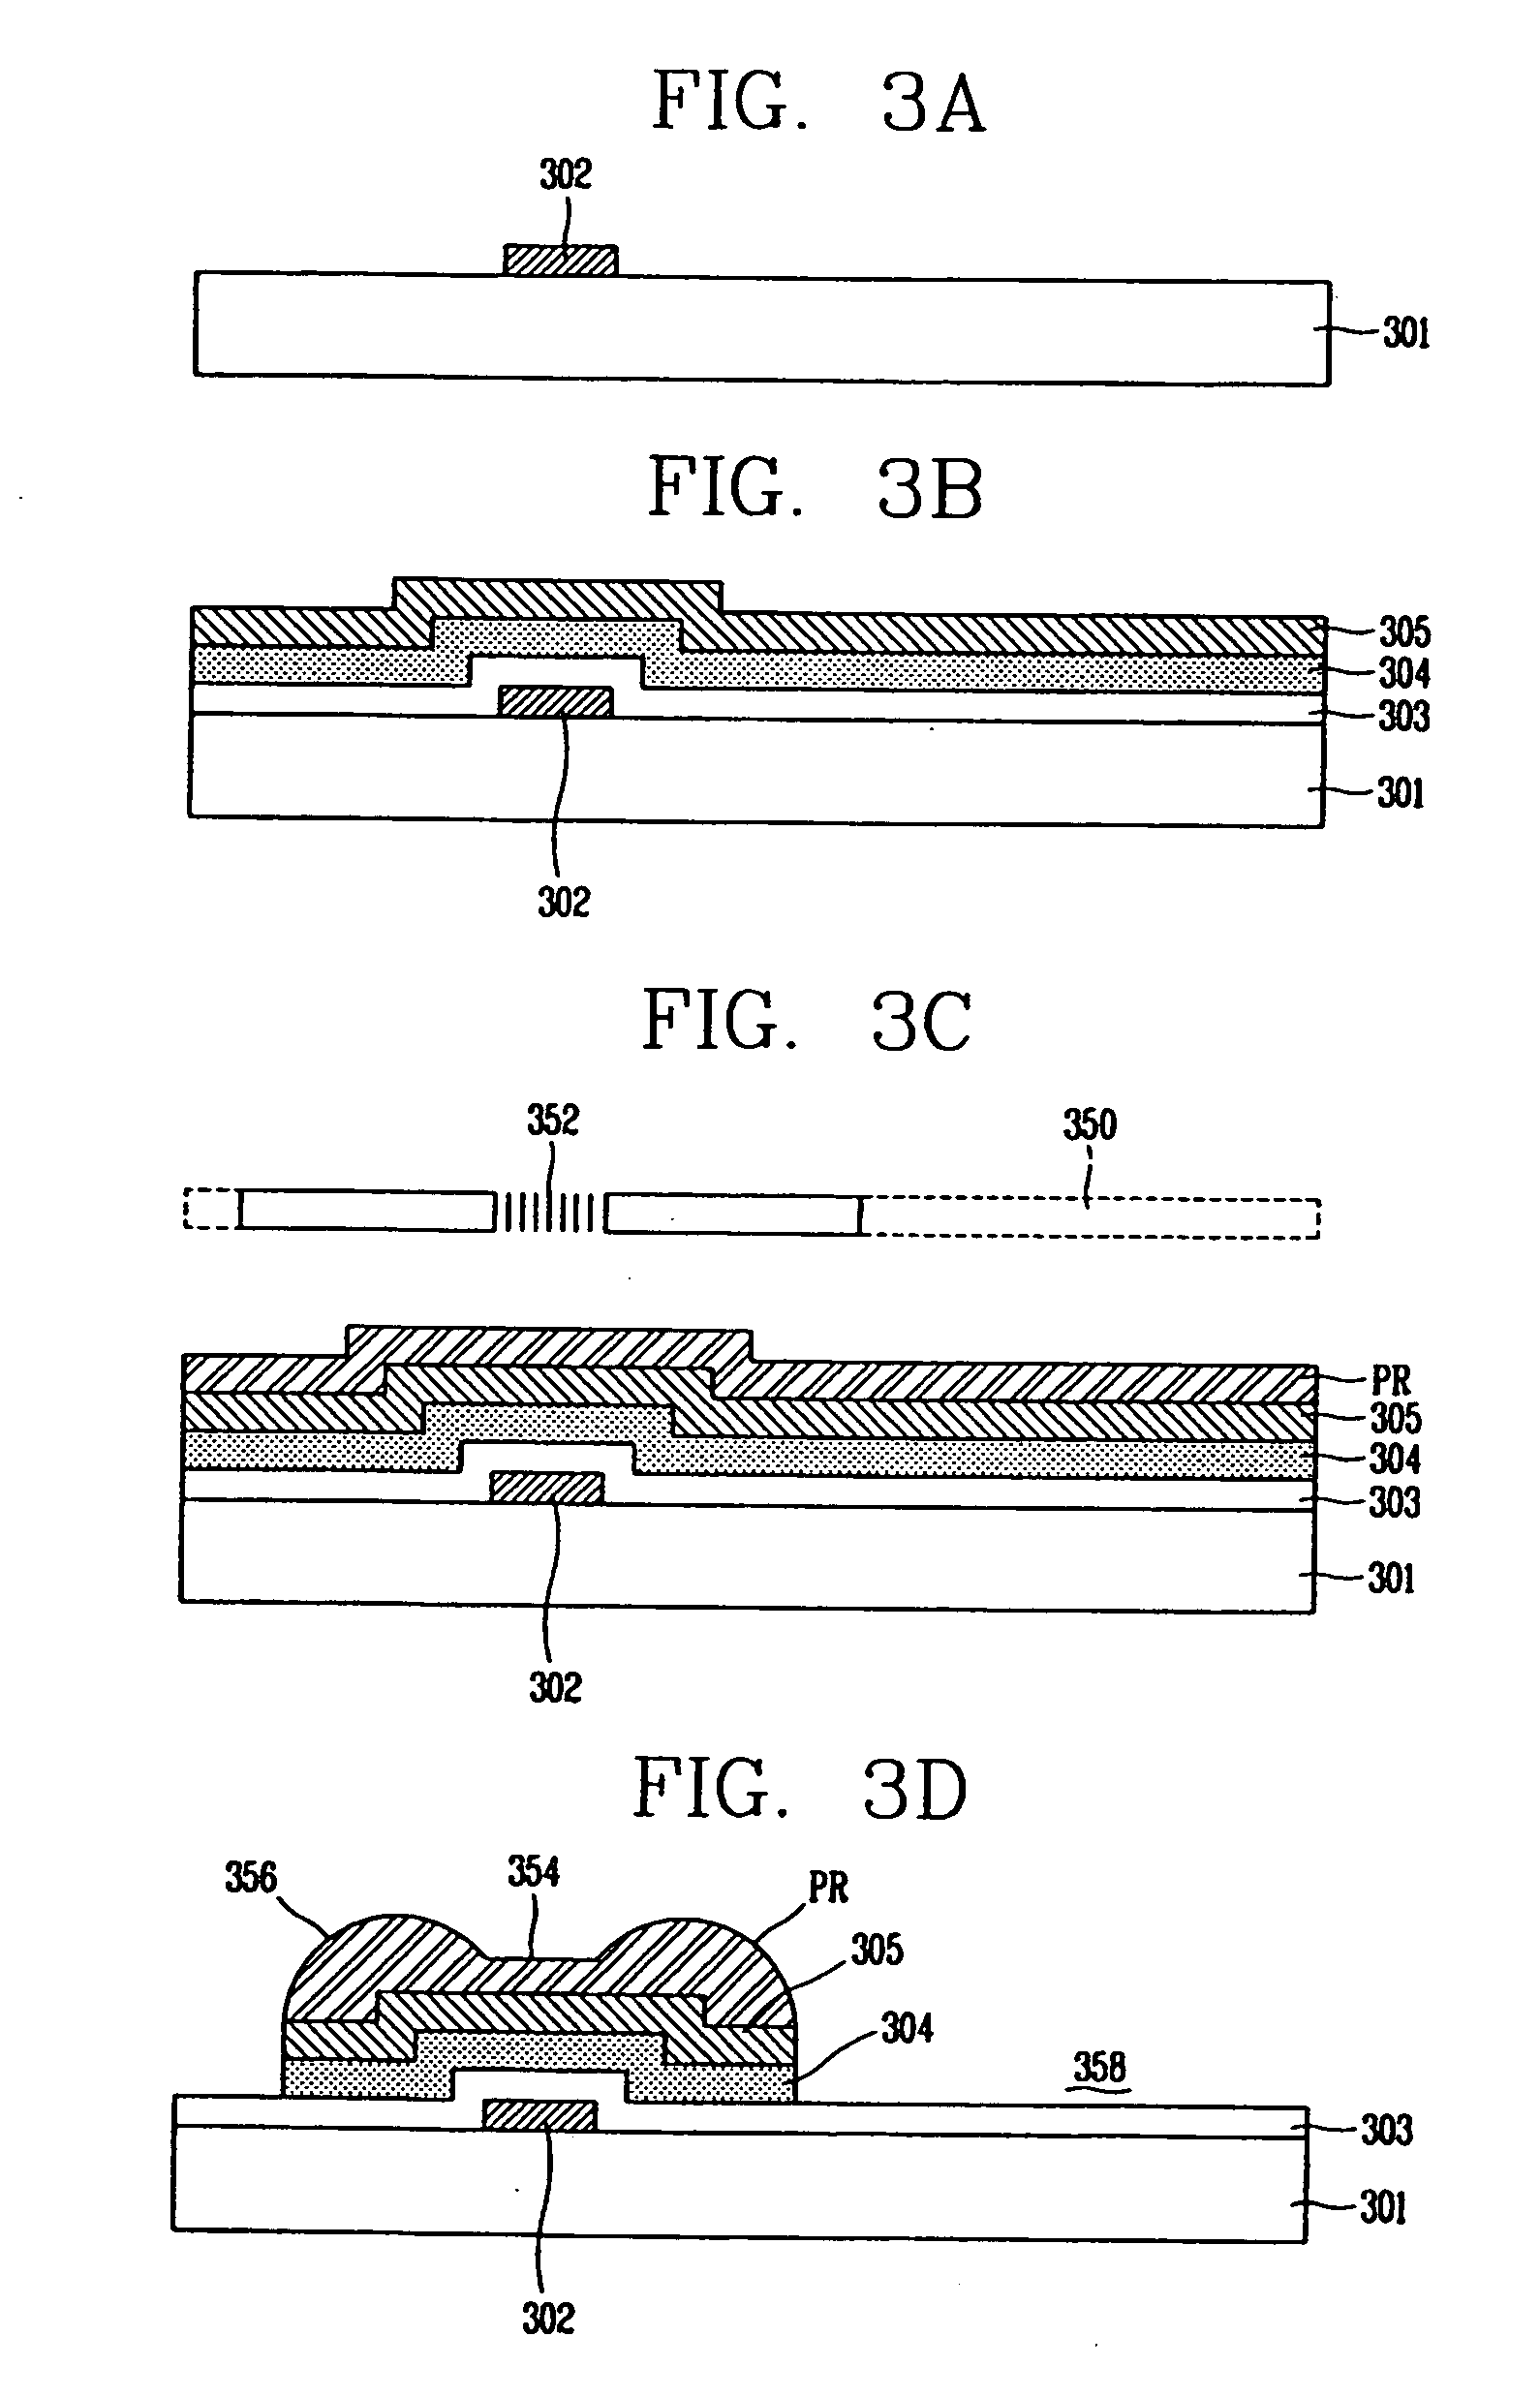 Transistor array substrate fabrication for an LCD